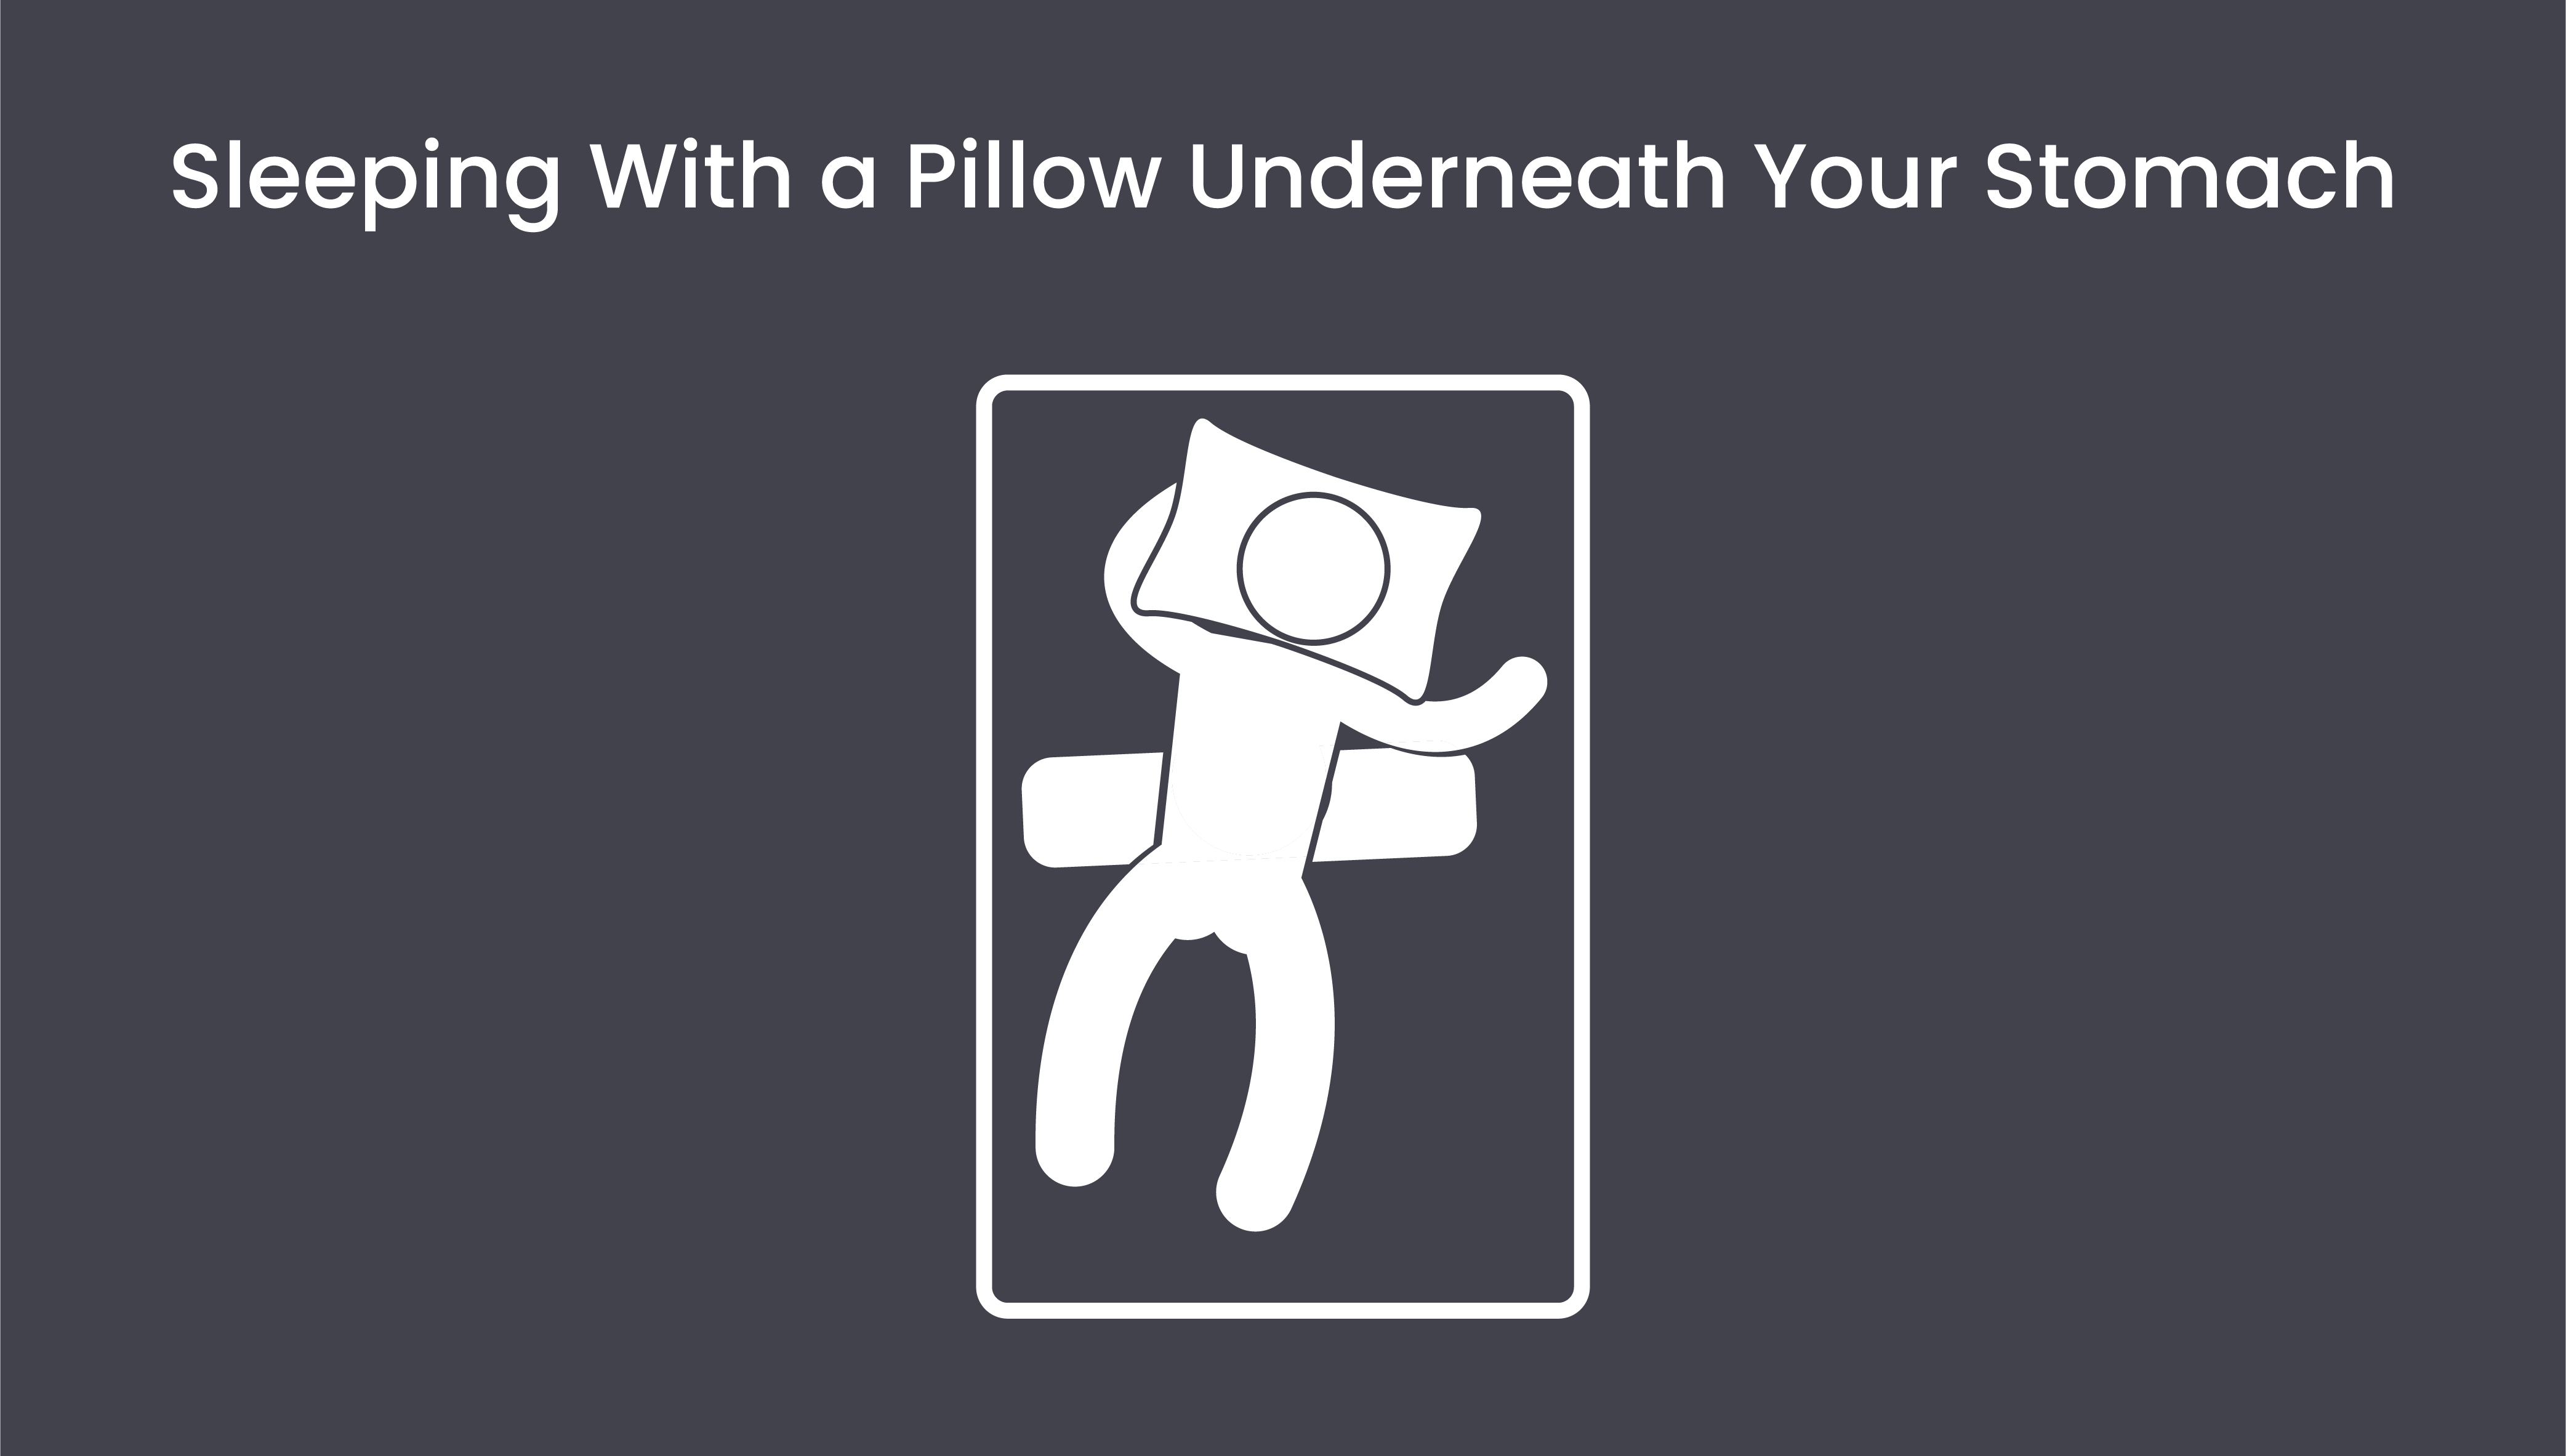 Sleeping with a pillow underneath your stomach